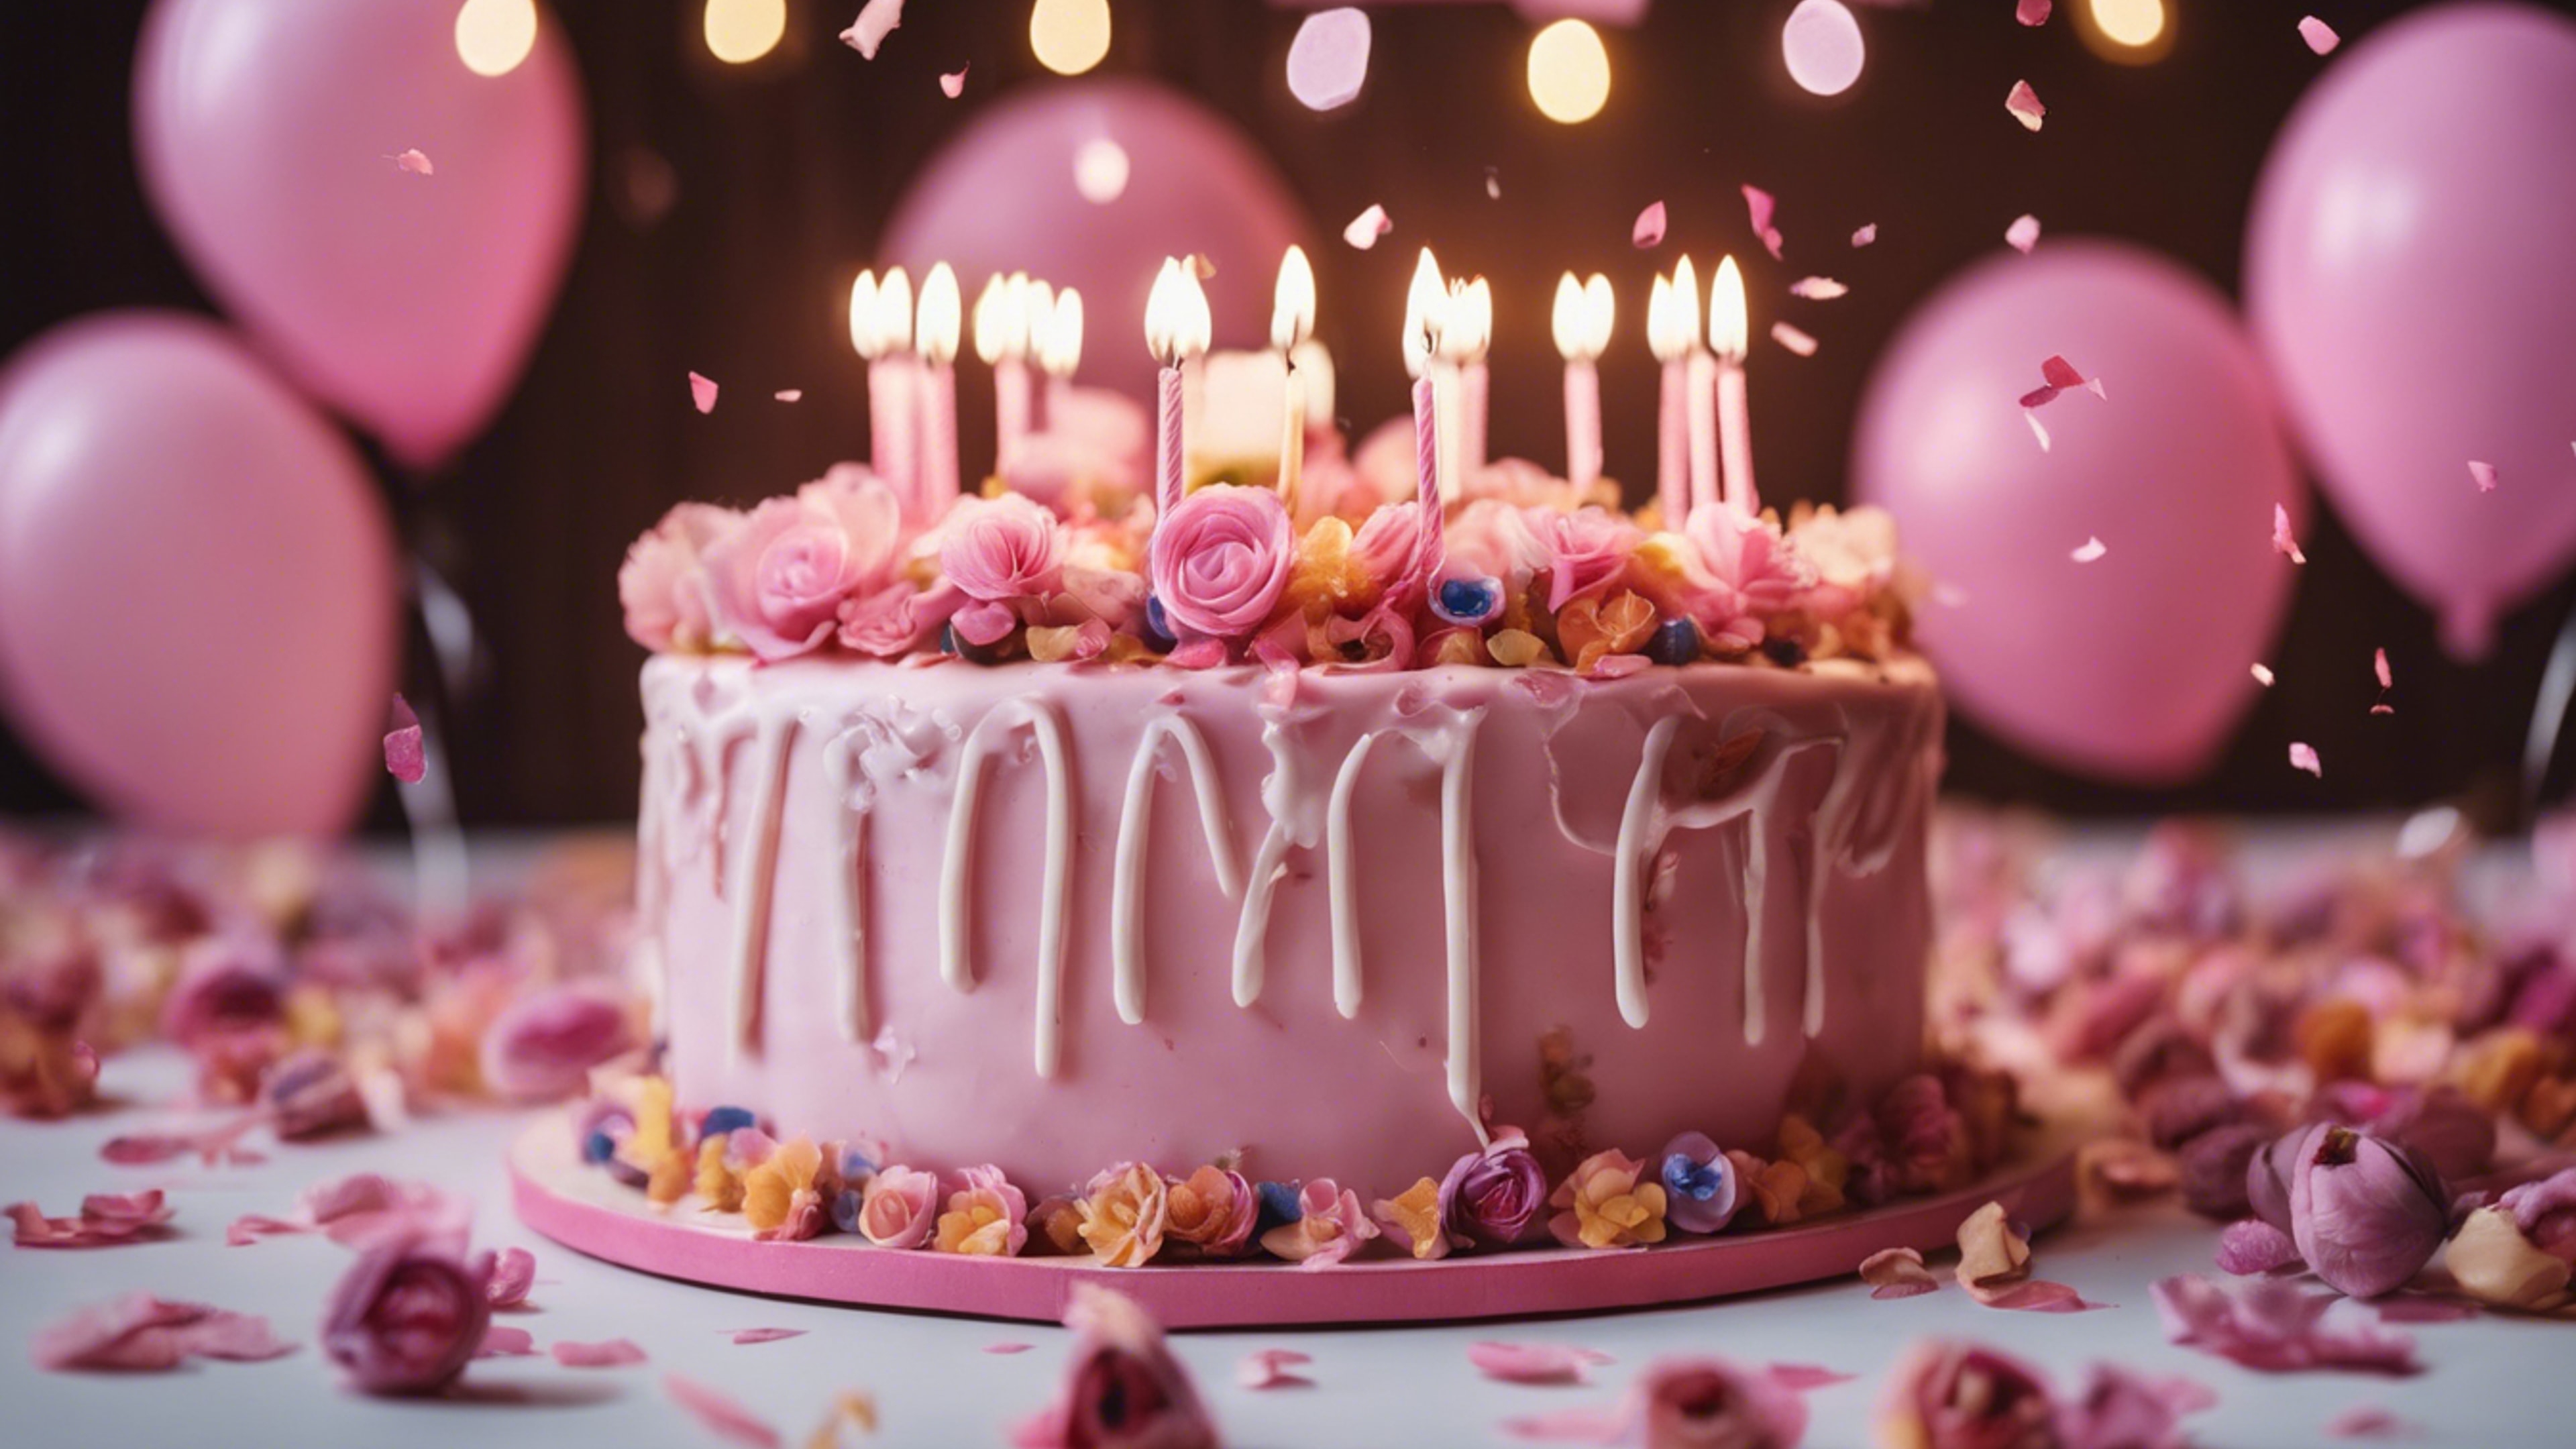 A girly birthday party with pink balloons, confetti, and a big cake decorated with edible flowers.壁紙[43e1da28e36740768483]